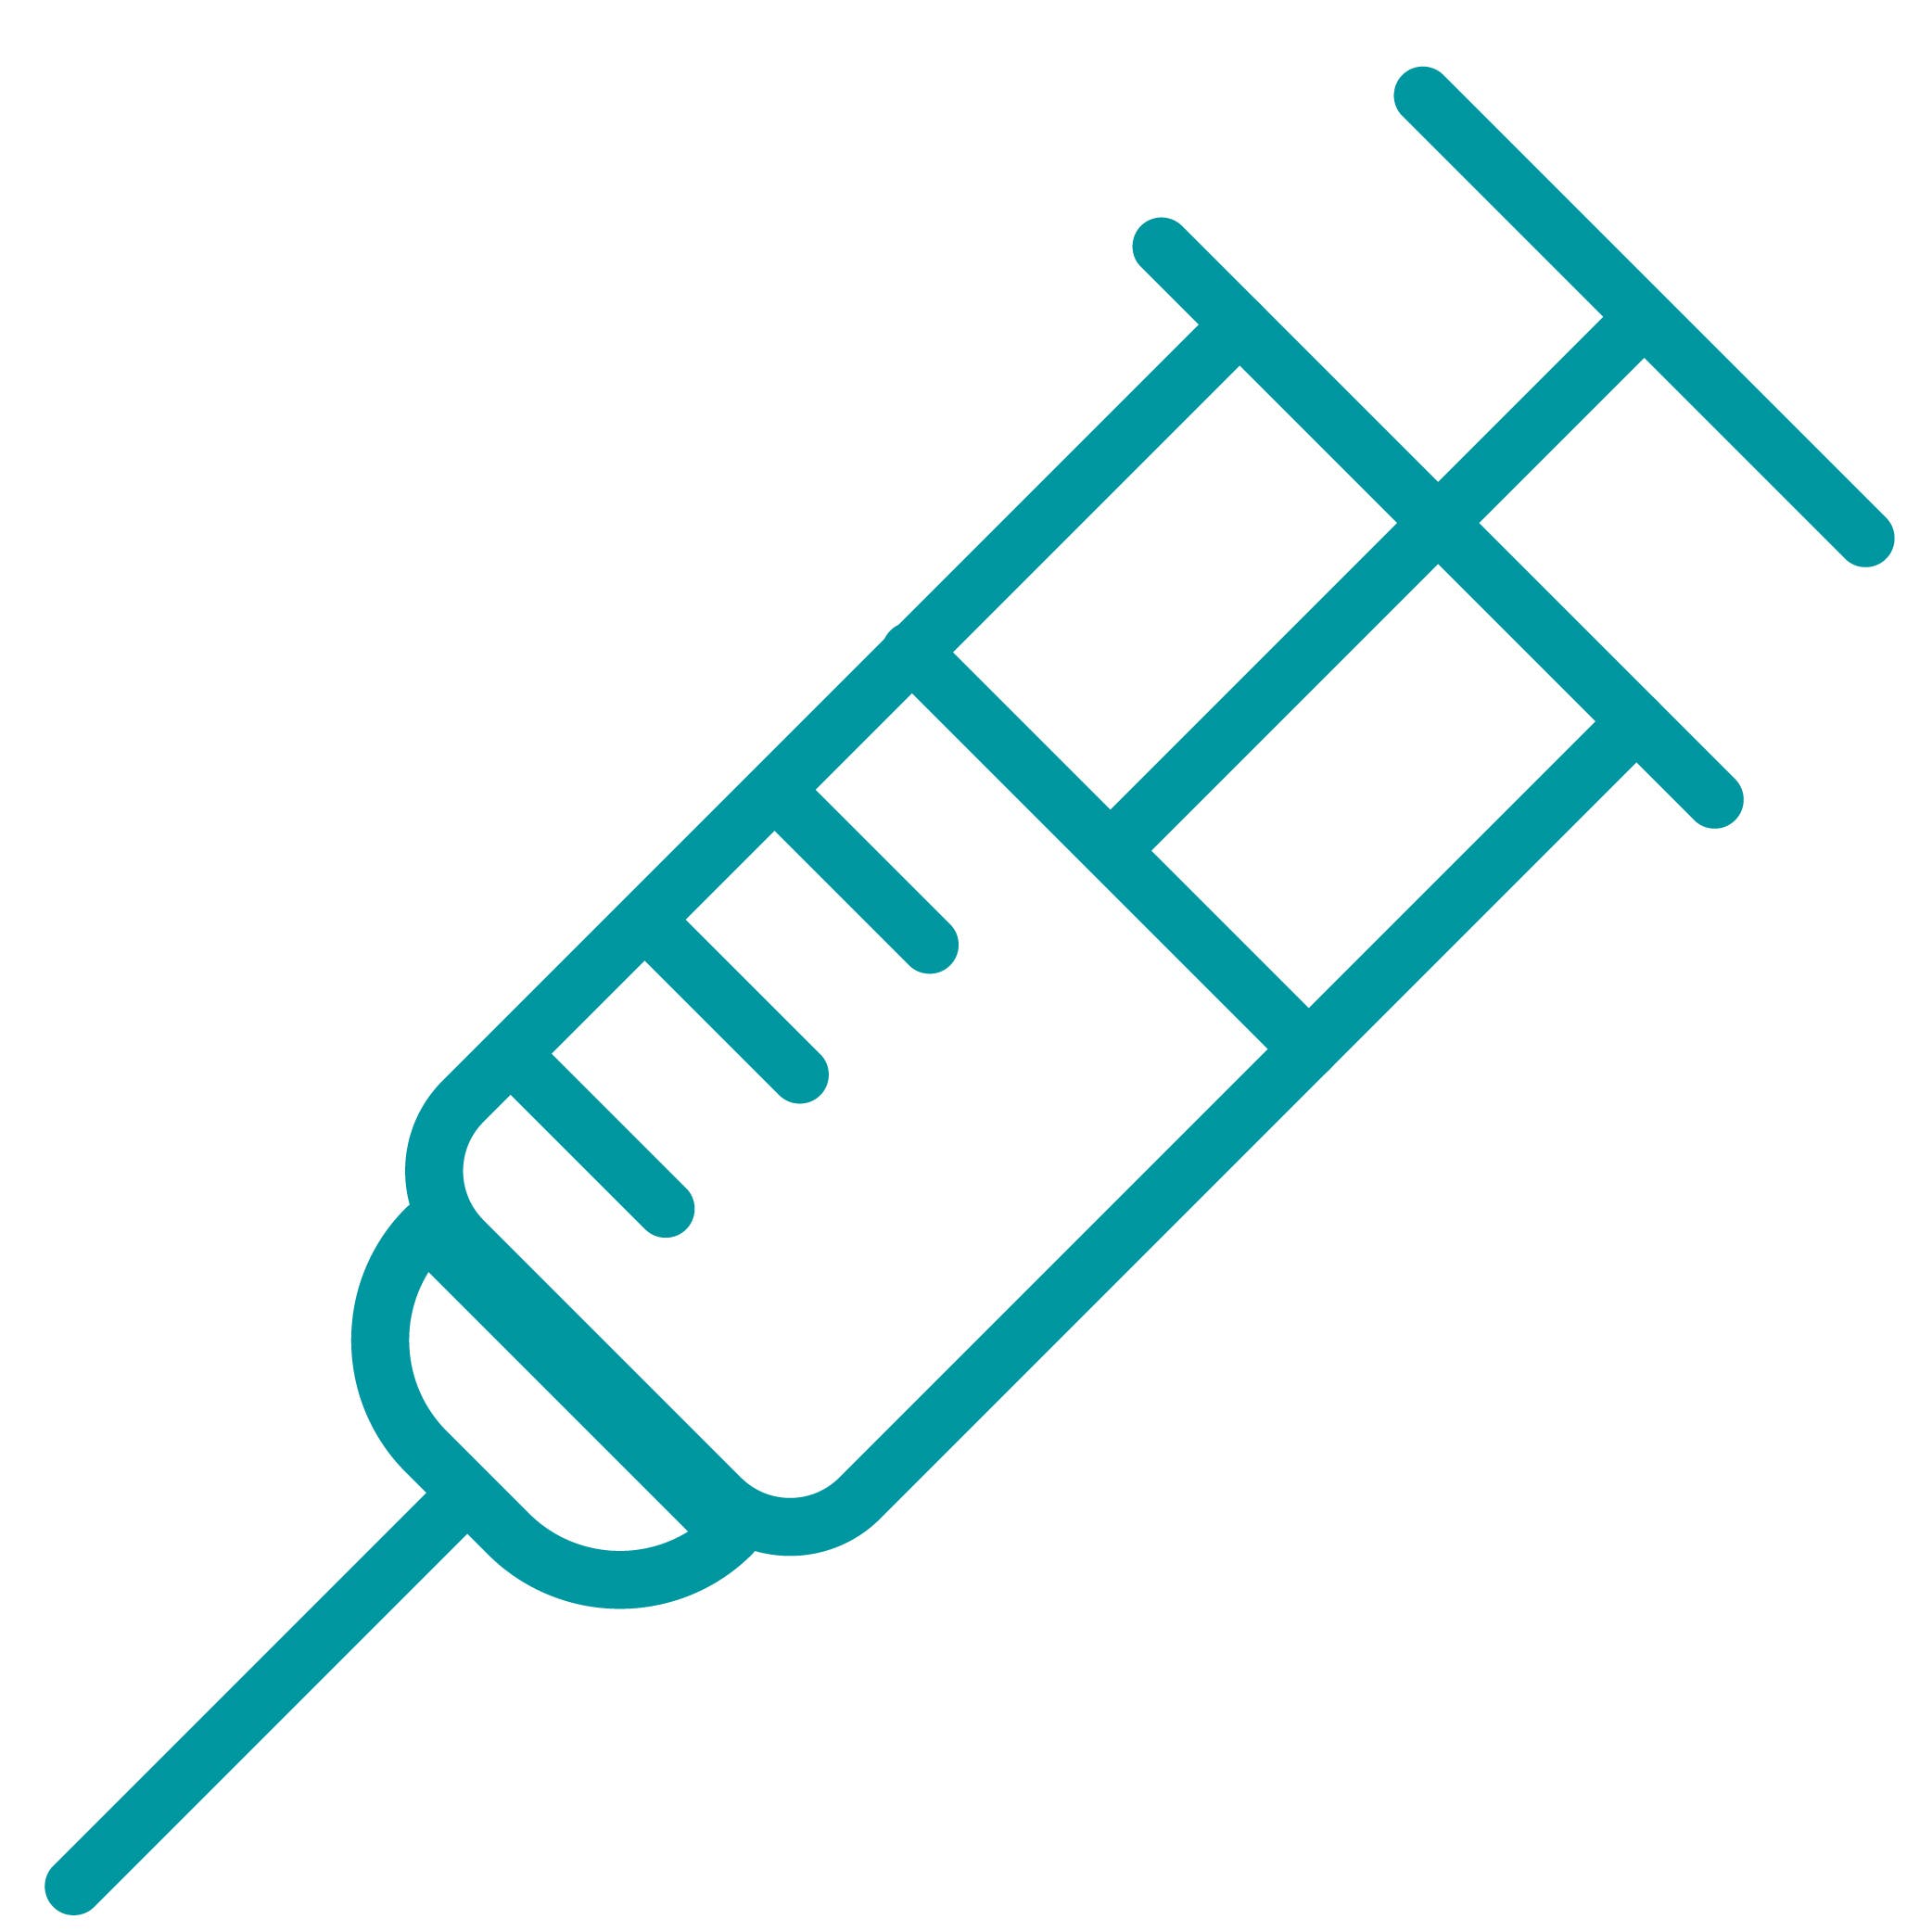 Icon of syringe needle at 45-degree pointed to lower left